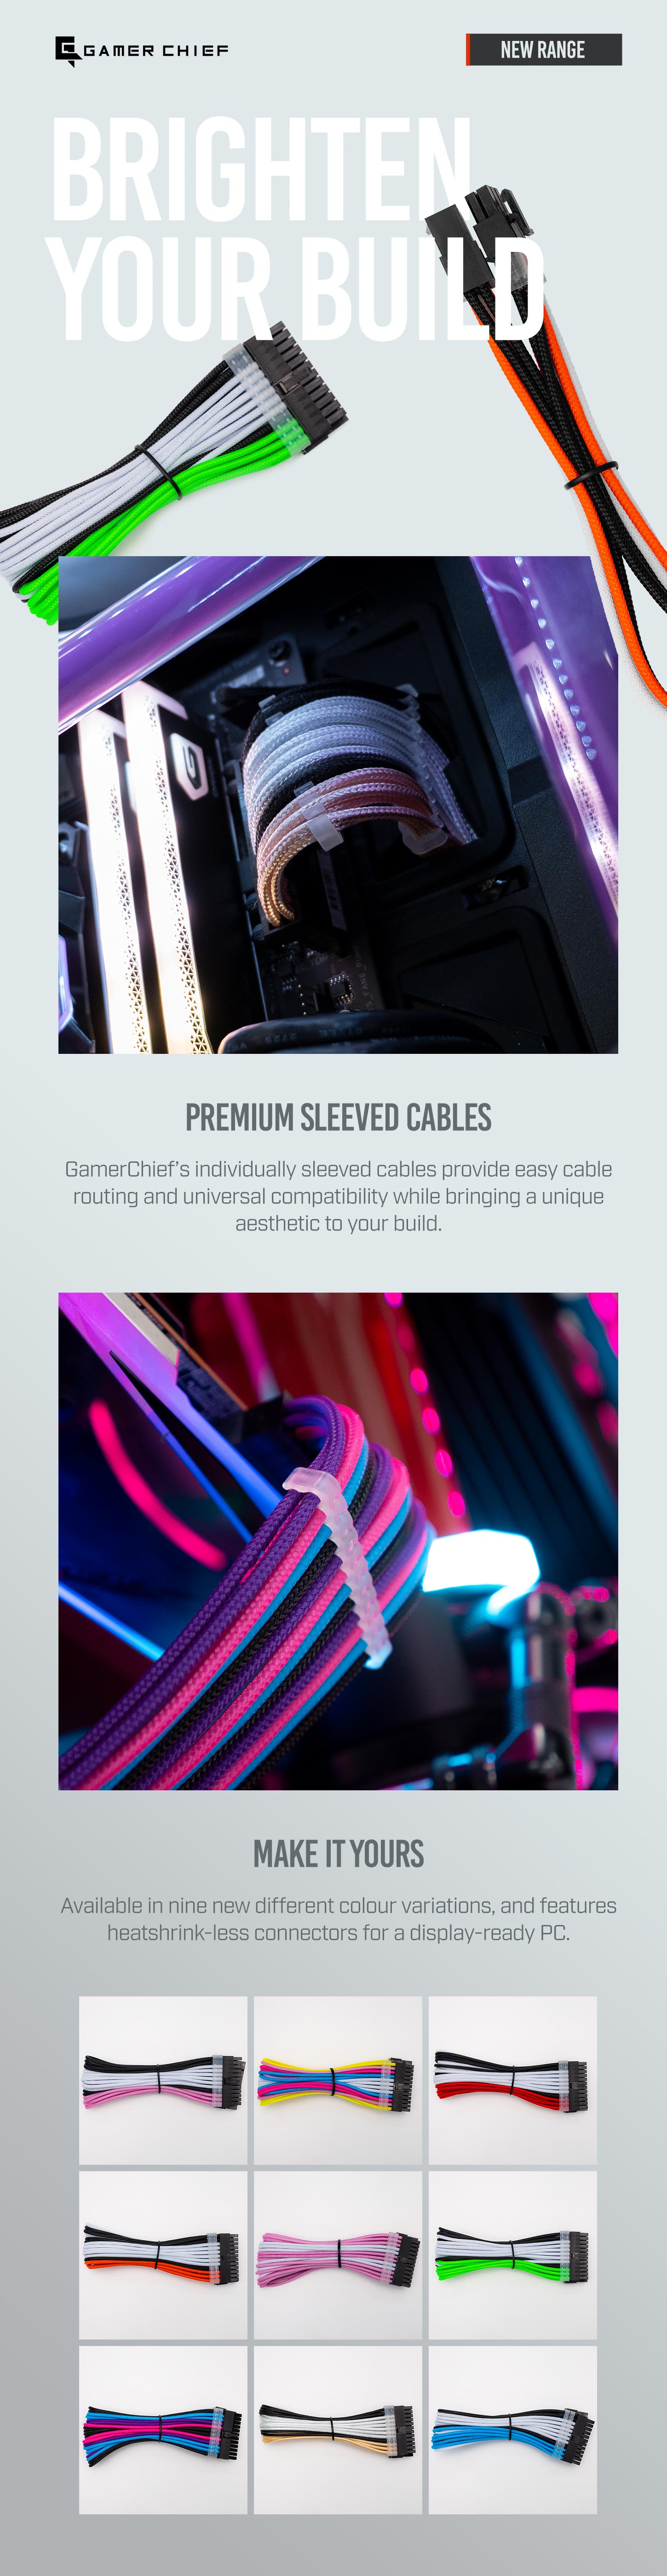 A large marketing image providing additional information about the product GamerChief Elite Series 8-Pin PCIe 30cm Sleeved Extension Cable (Red/White/Black) - Additional alt info not provided